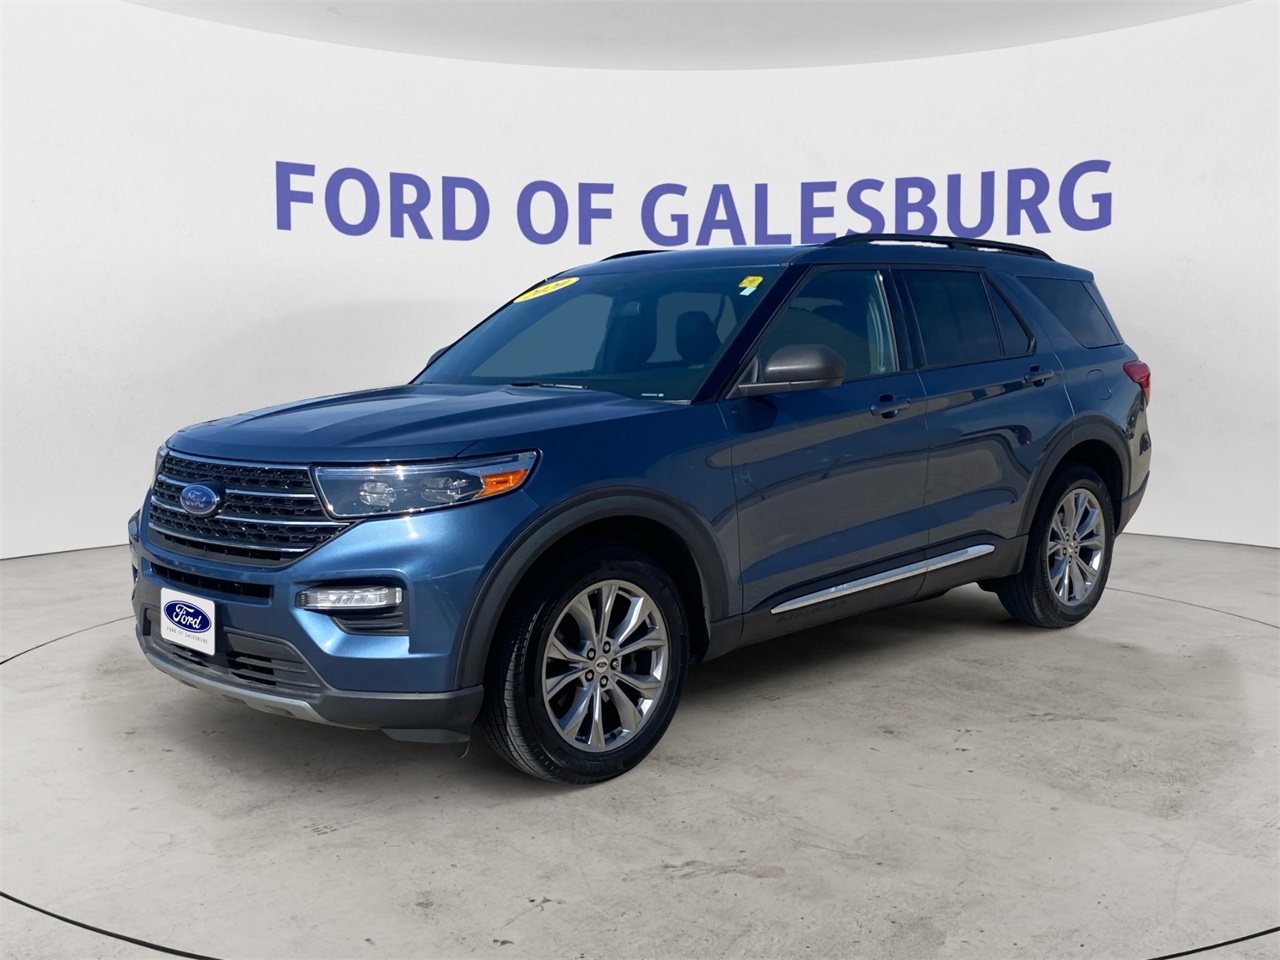 2020 Ford Explorer Galesburg IL